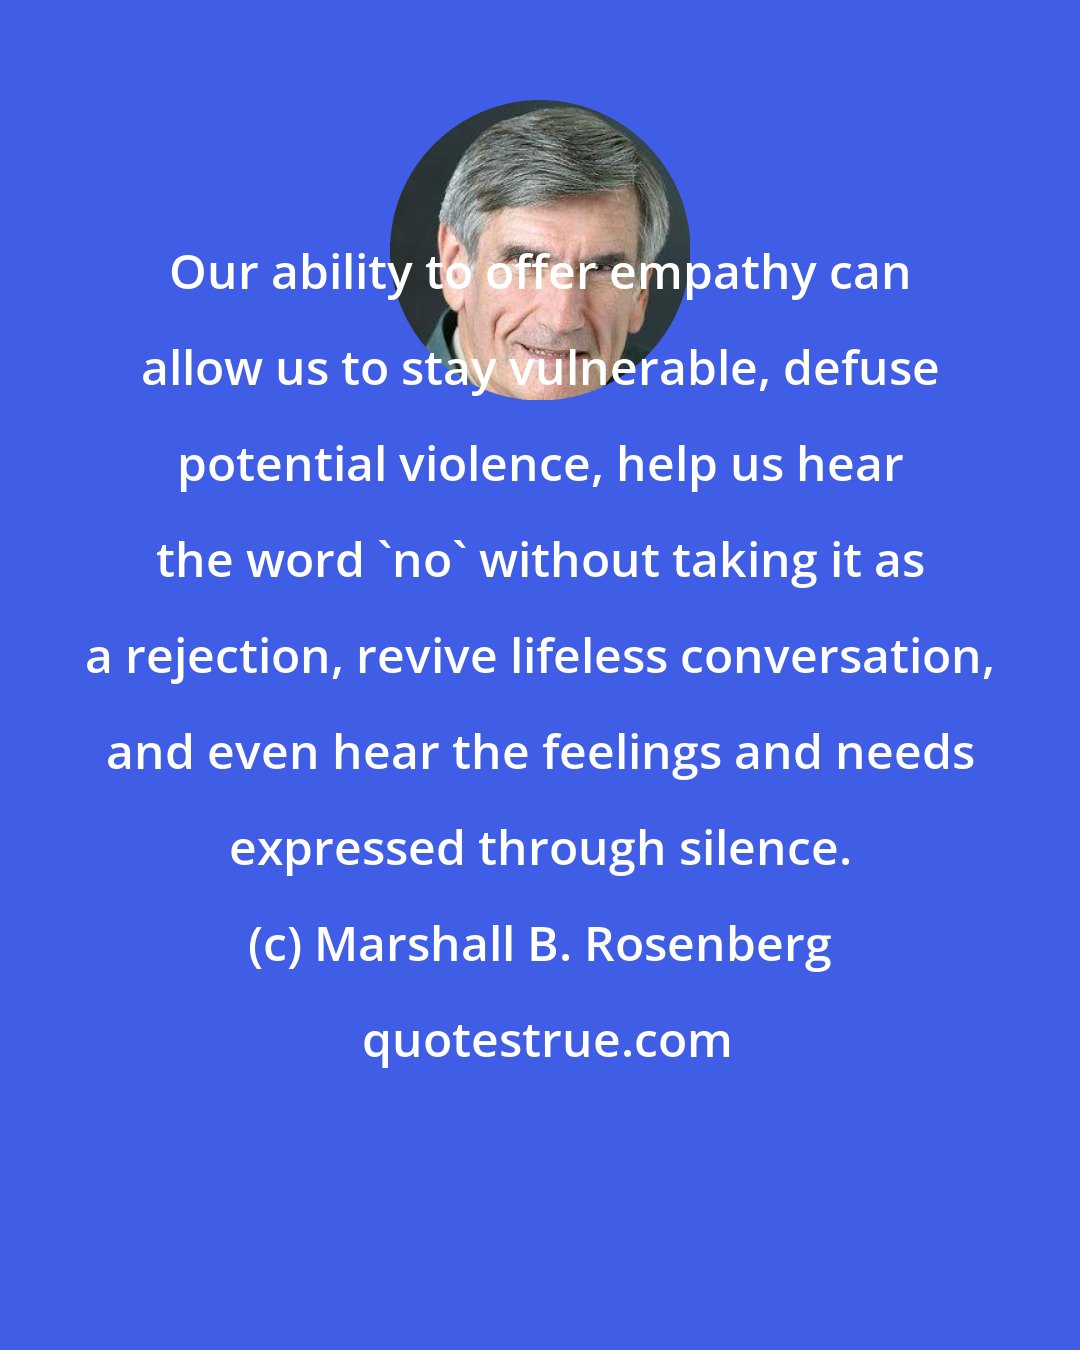 Marshall B. Rosenberg: Our ability to offer empathy can allow us to stay vulnerable, defuse potential violence, help us hear the word 'no' without taking it as a rejection, revive lifeless conversation, and even hear the feelings and needs expressed through silence.